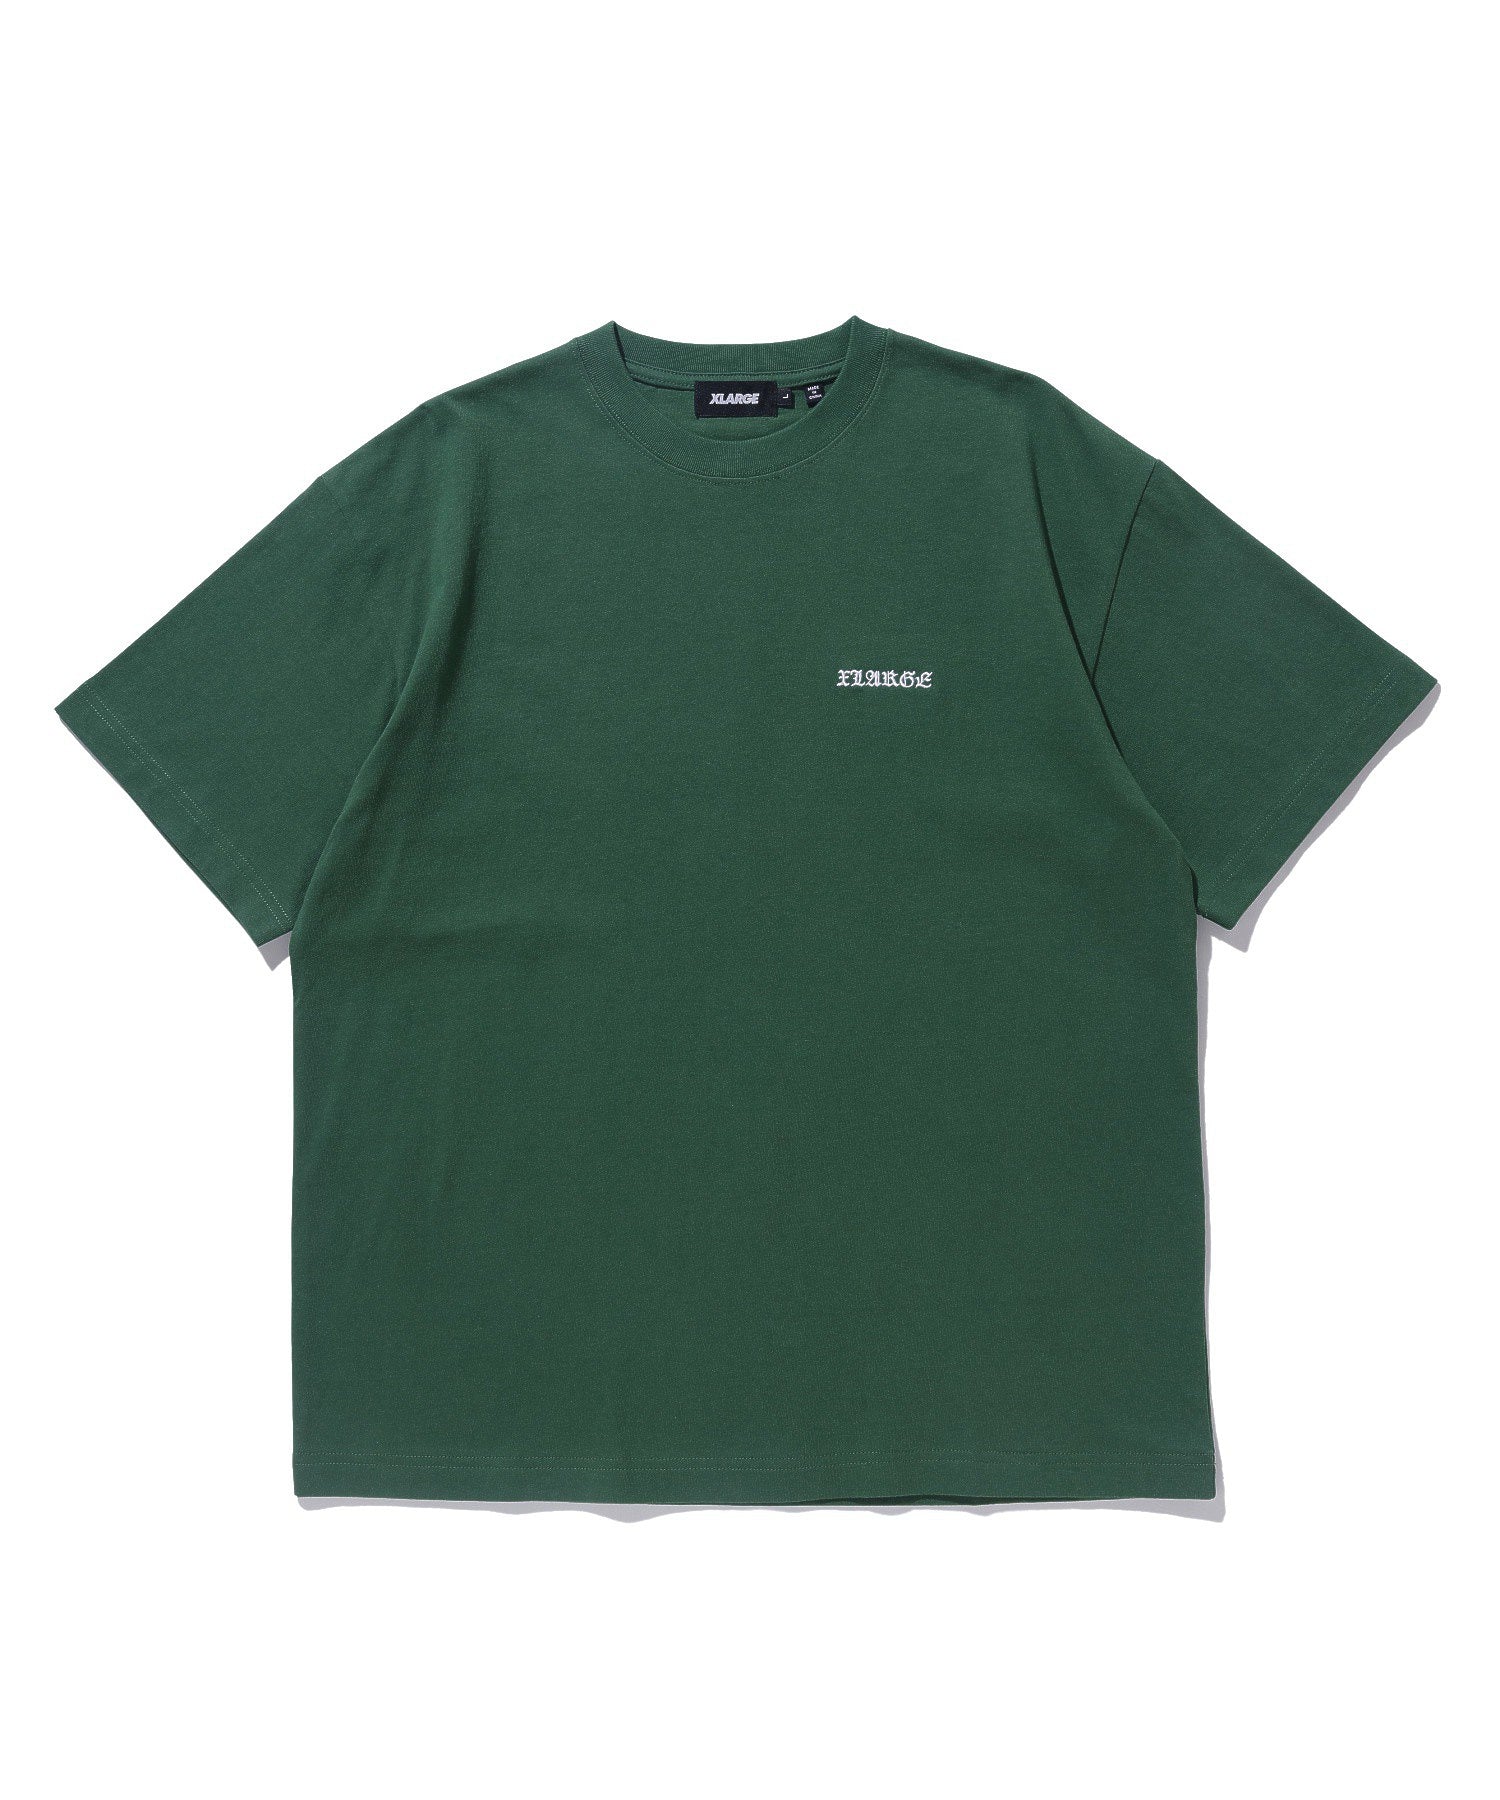 EMBROIDERED OLD ENGLISH S/S TEE